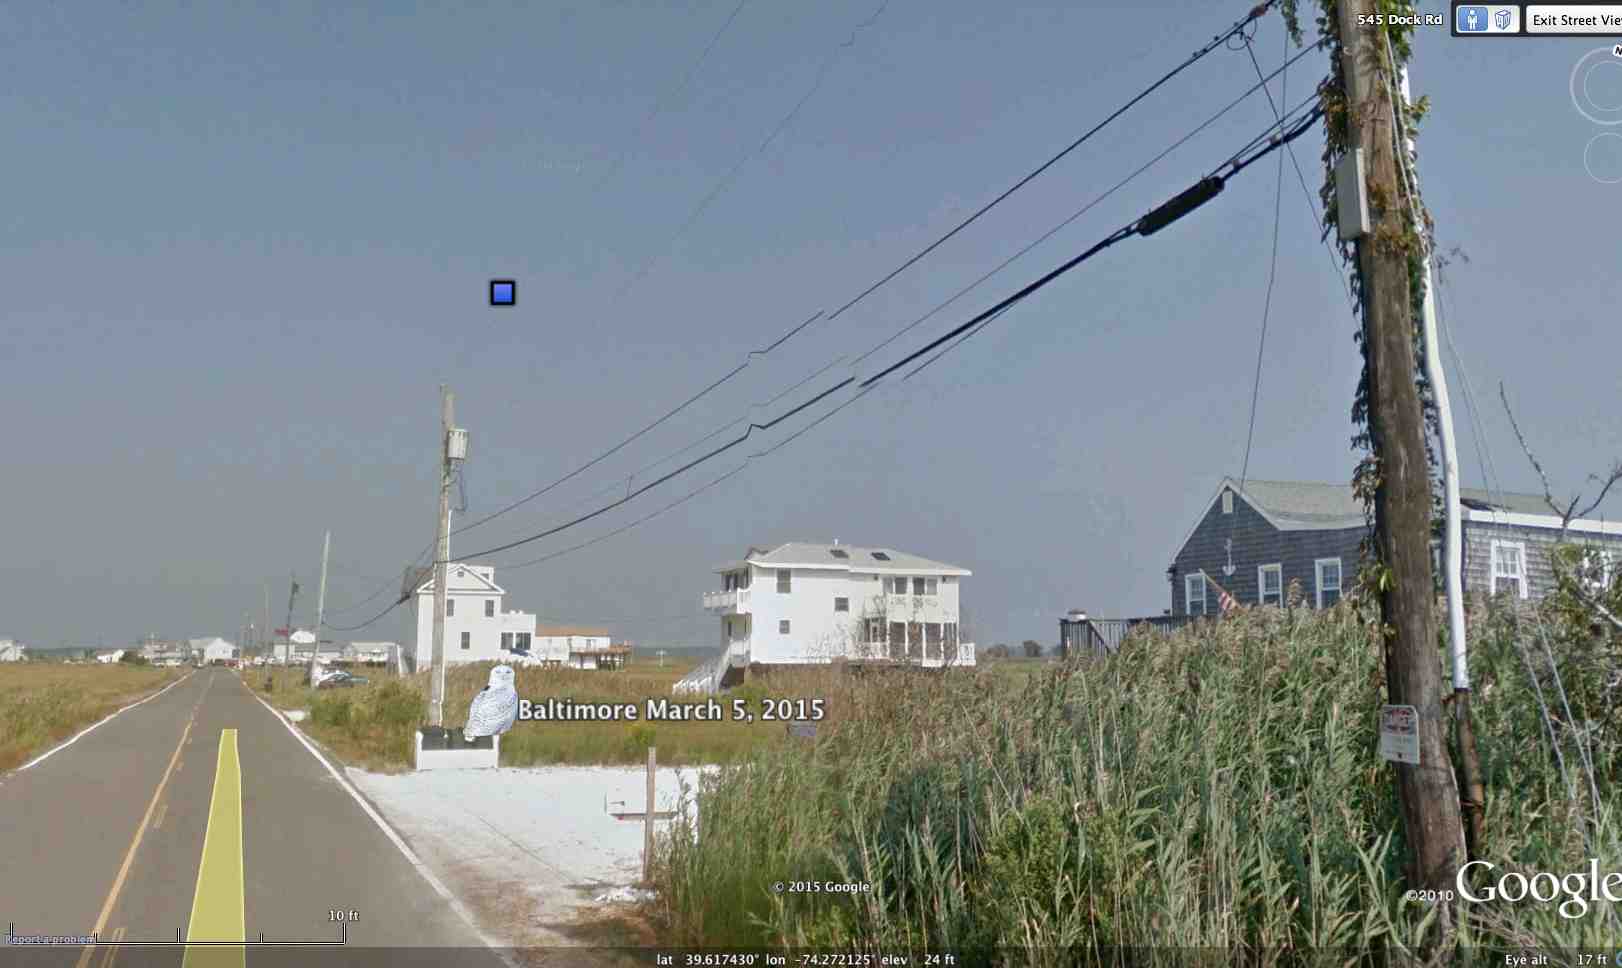 Baltimore's latest location, on a utility pole among some (presumably deserted) beach houses by Little Egg Harbor, NJ. This Google Street View photo was taken when the landscape was a whole lot warmer and a lot less white than it is now (©Project SNOWstorm and Google Earth)